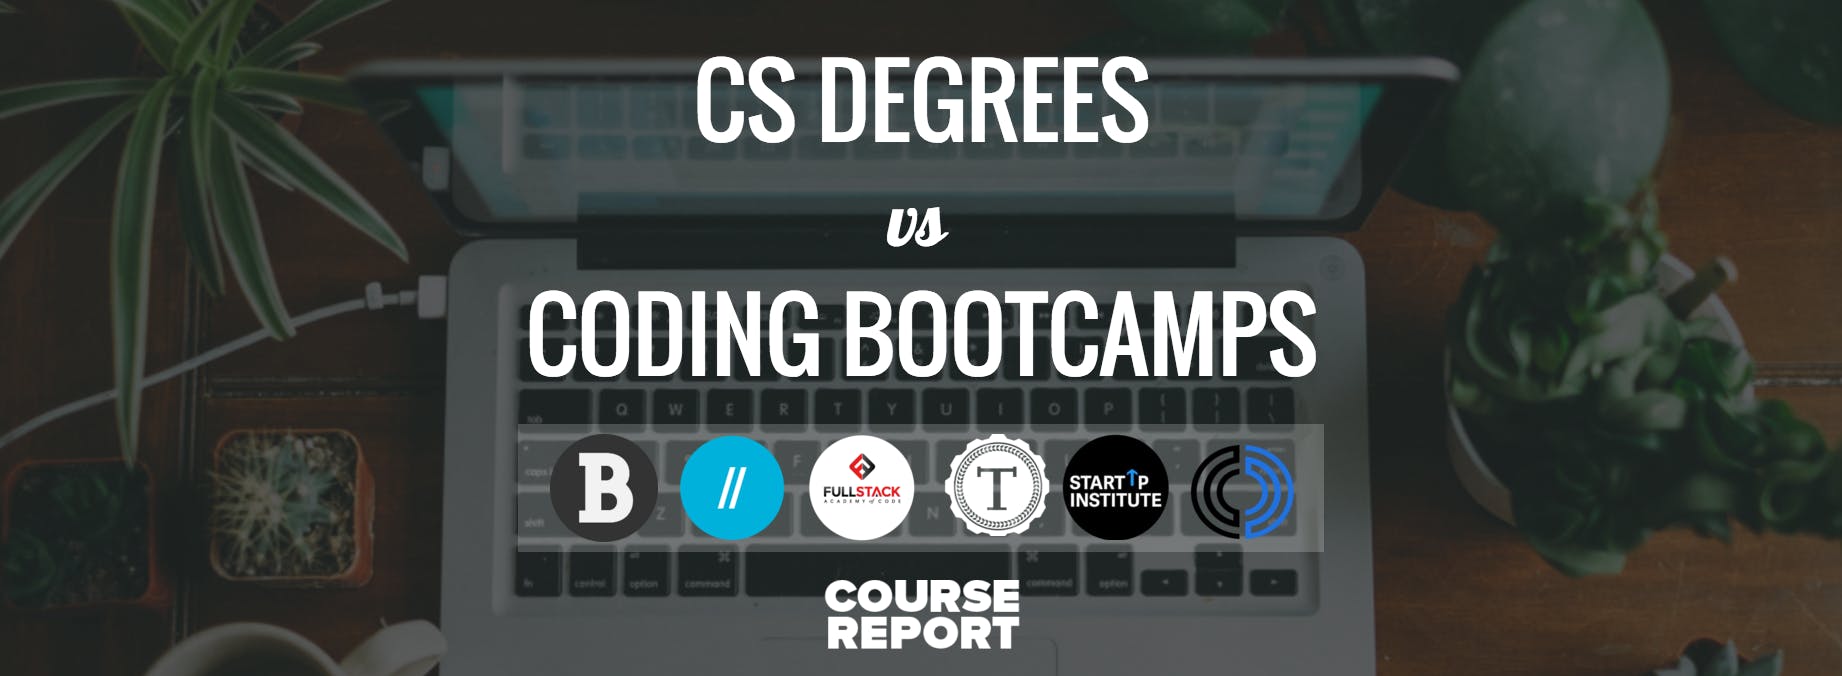 free coding bootcamps for women byc